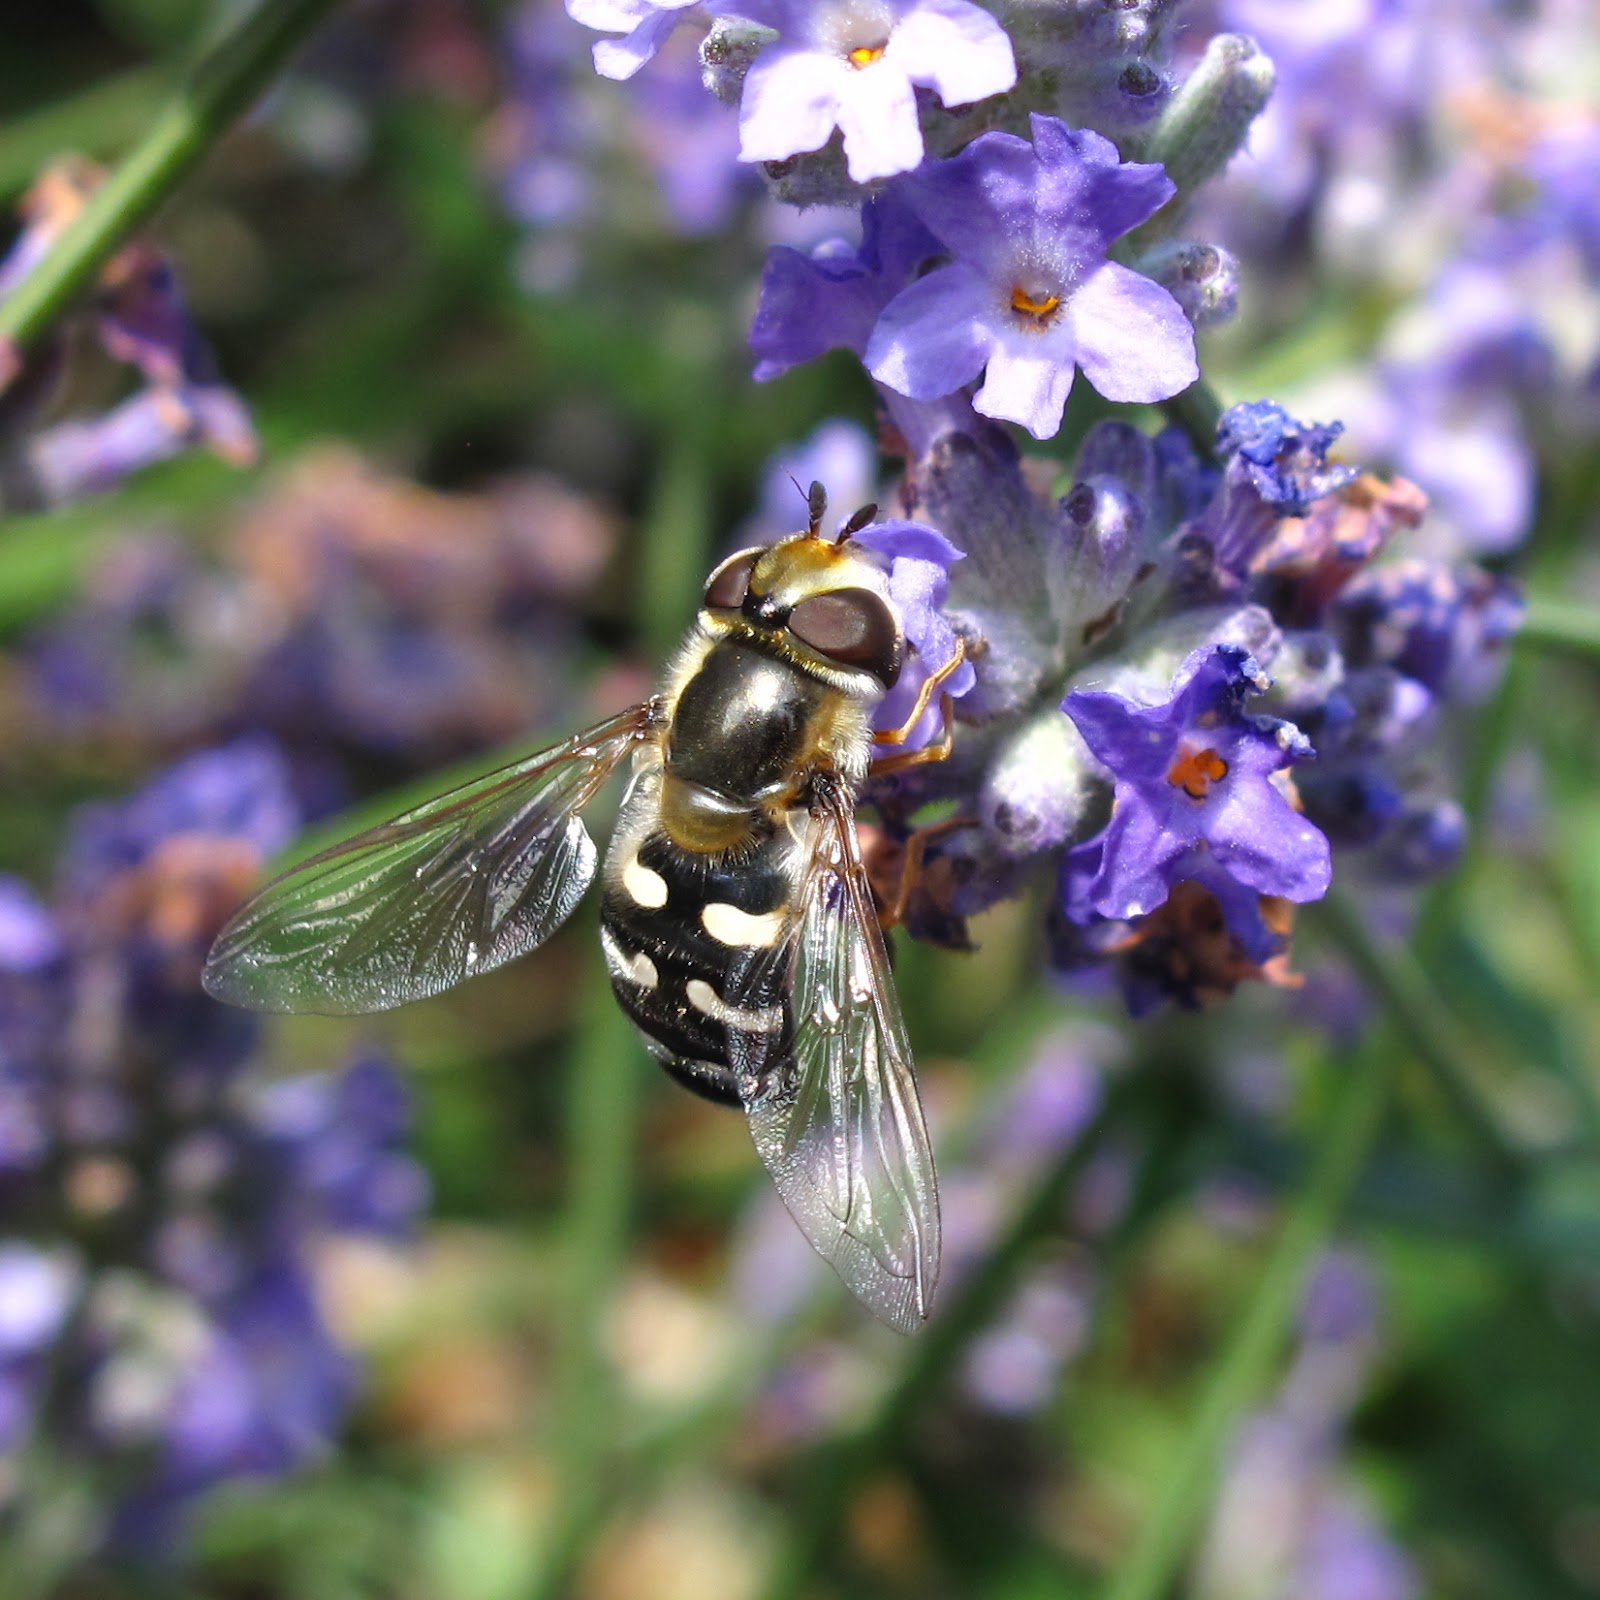 Striped hover fly photo